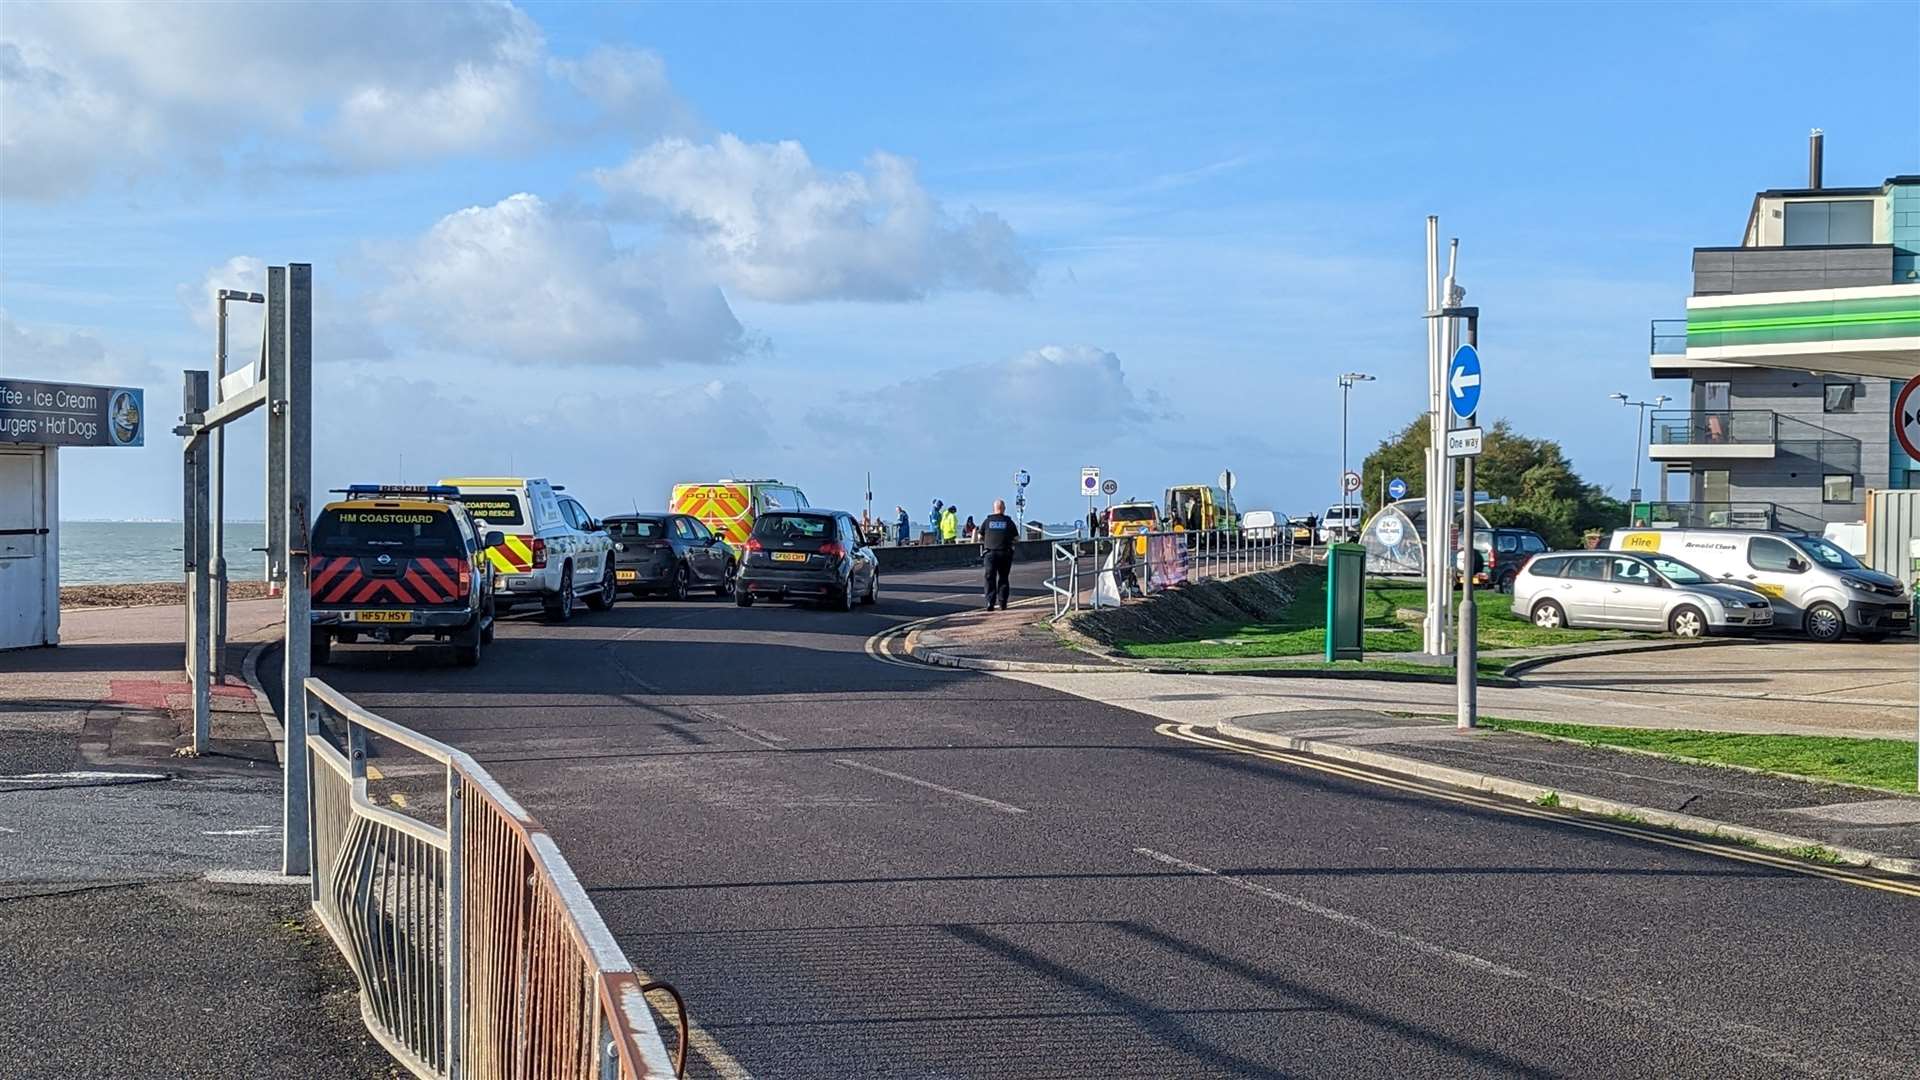 A large police presence was spotted near the BP garage on Princess Parade in Seabrook, Hythe, this morning